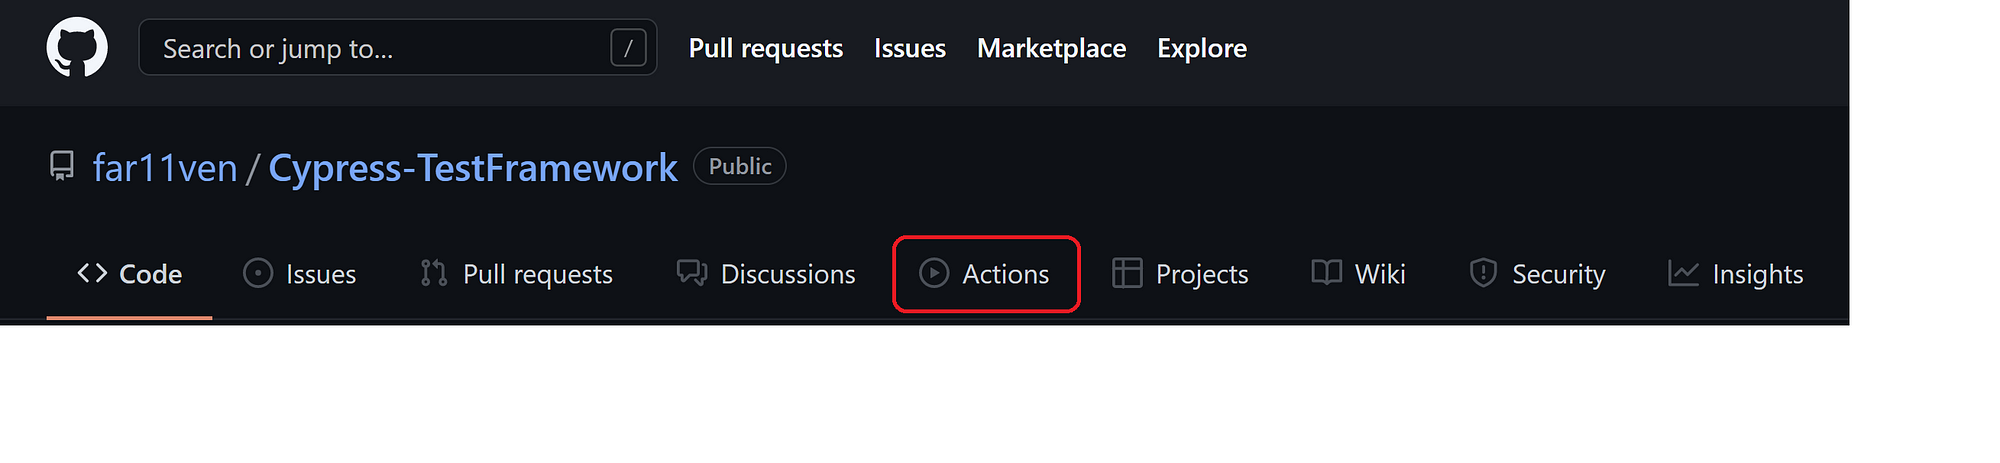 Running Cypress Tests in GitHub Actions (Part 10)